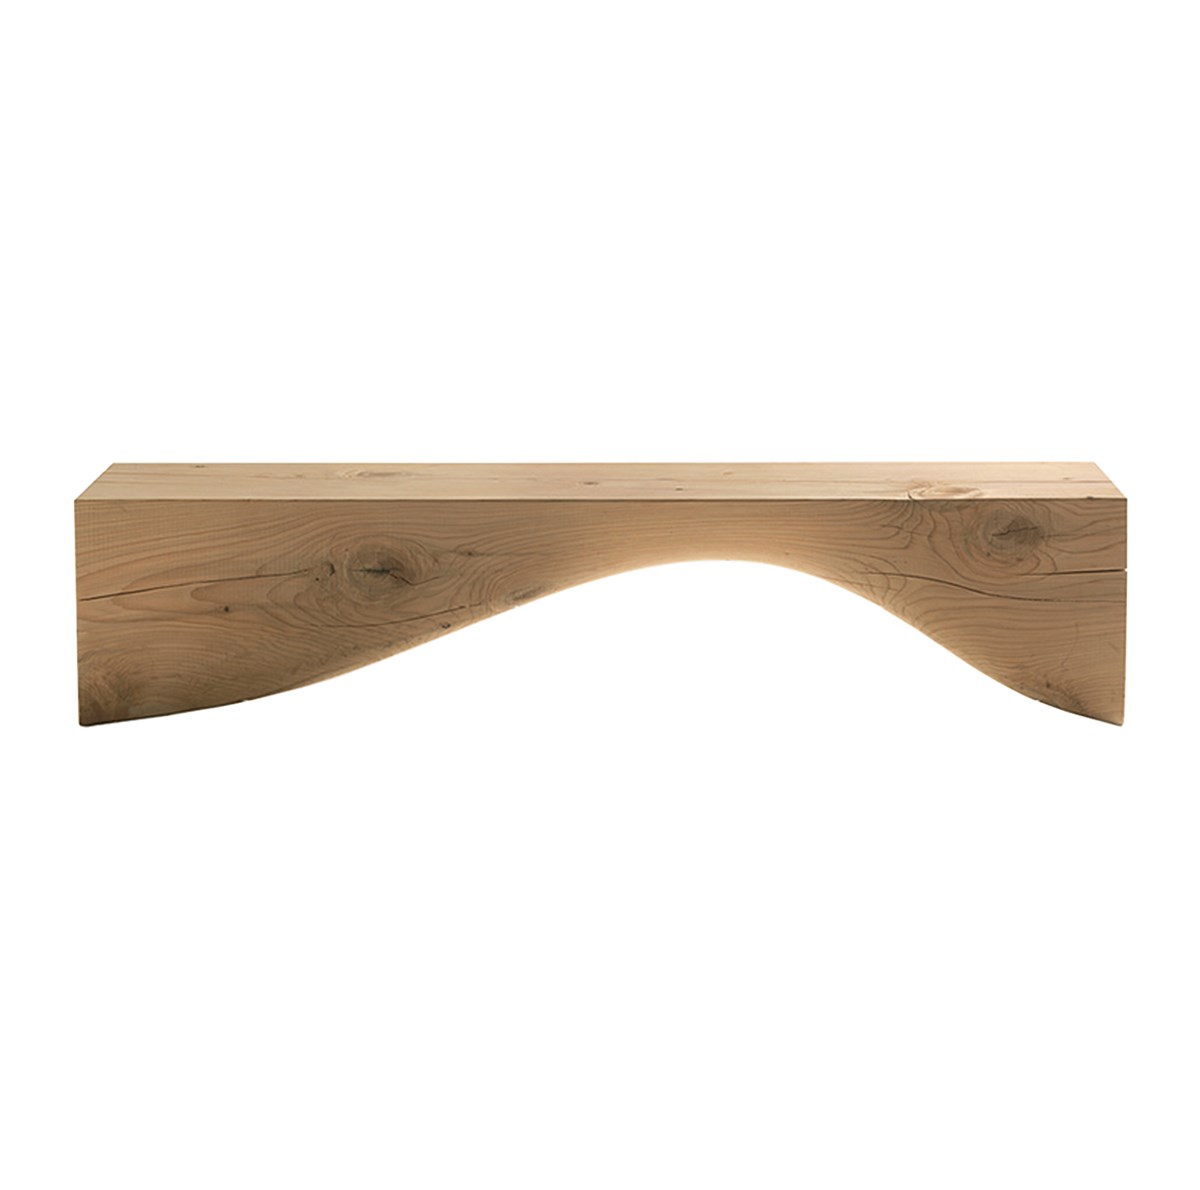 Riva-1920-Brodie-Neill-Curve-Bench-Matisse-1